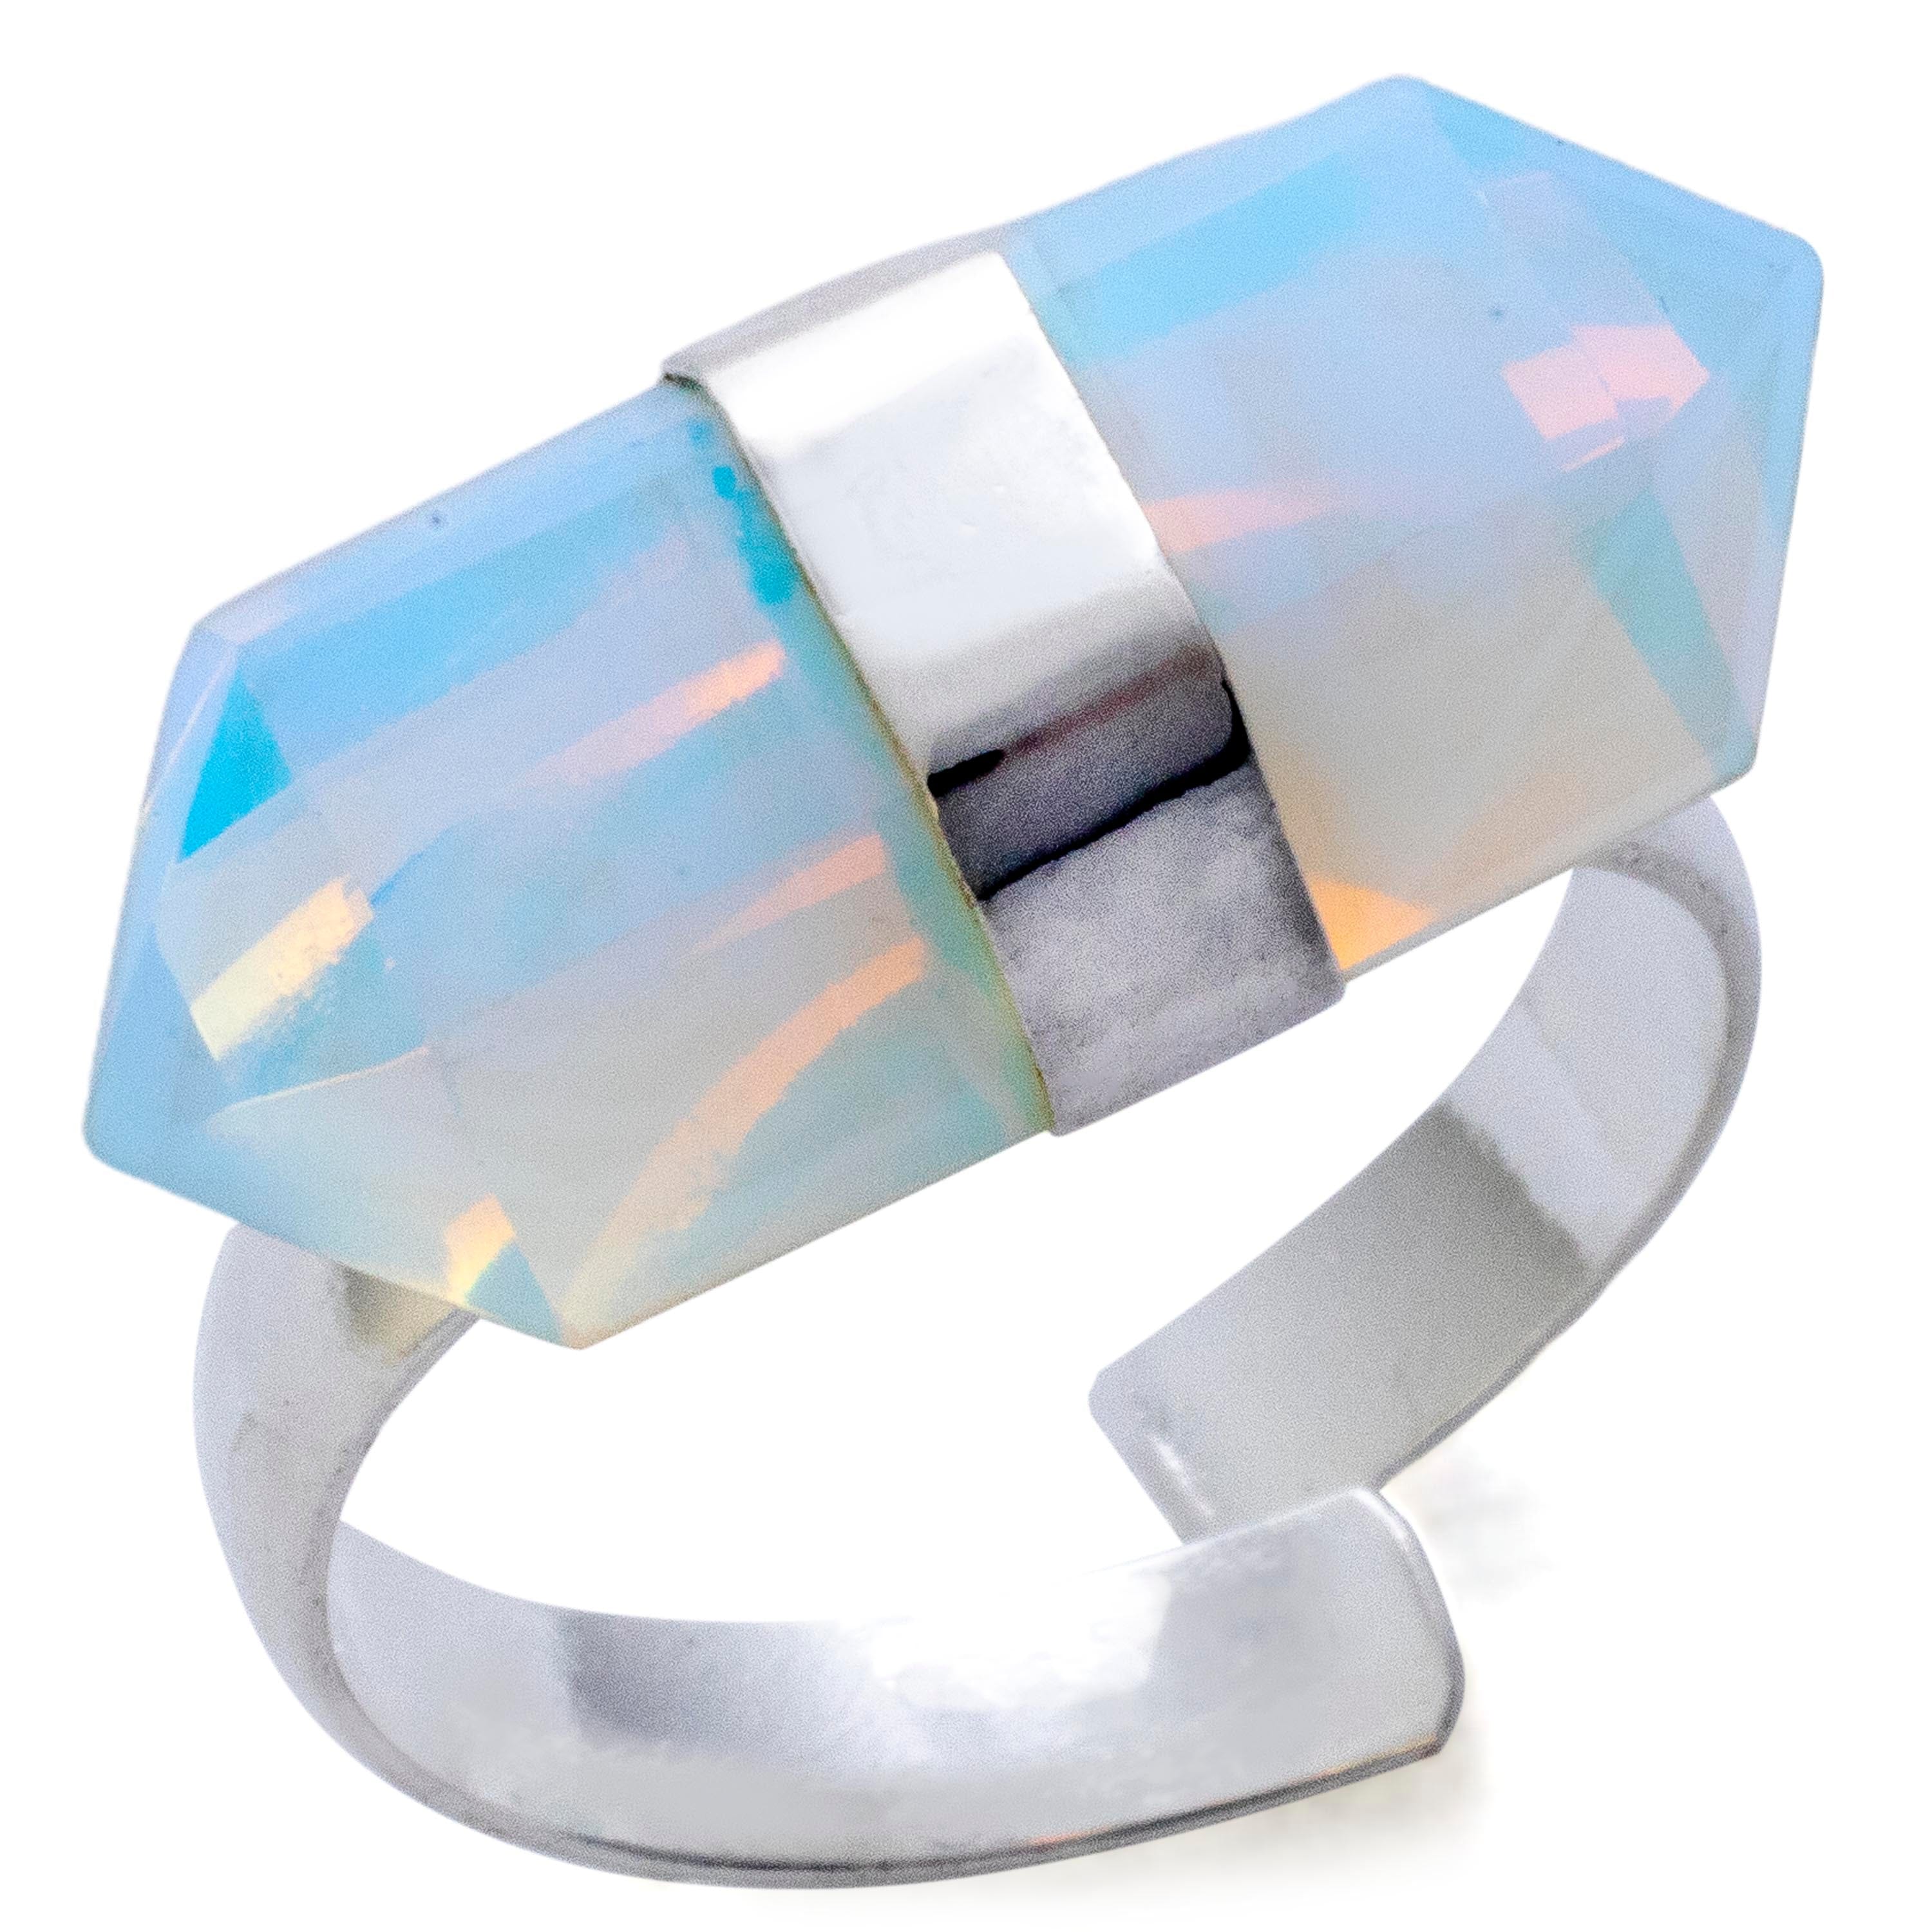 Kalifano Crystal Jewelry Silver Plated Moonstone Adjustable Ring CJR-MJS-MS